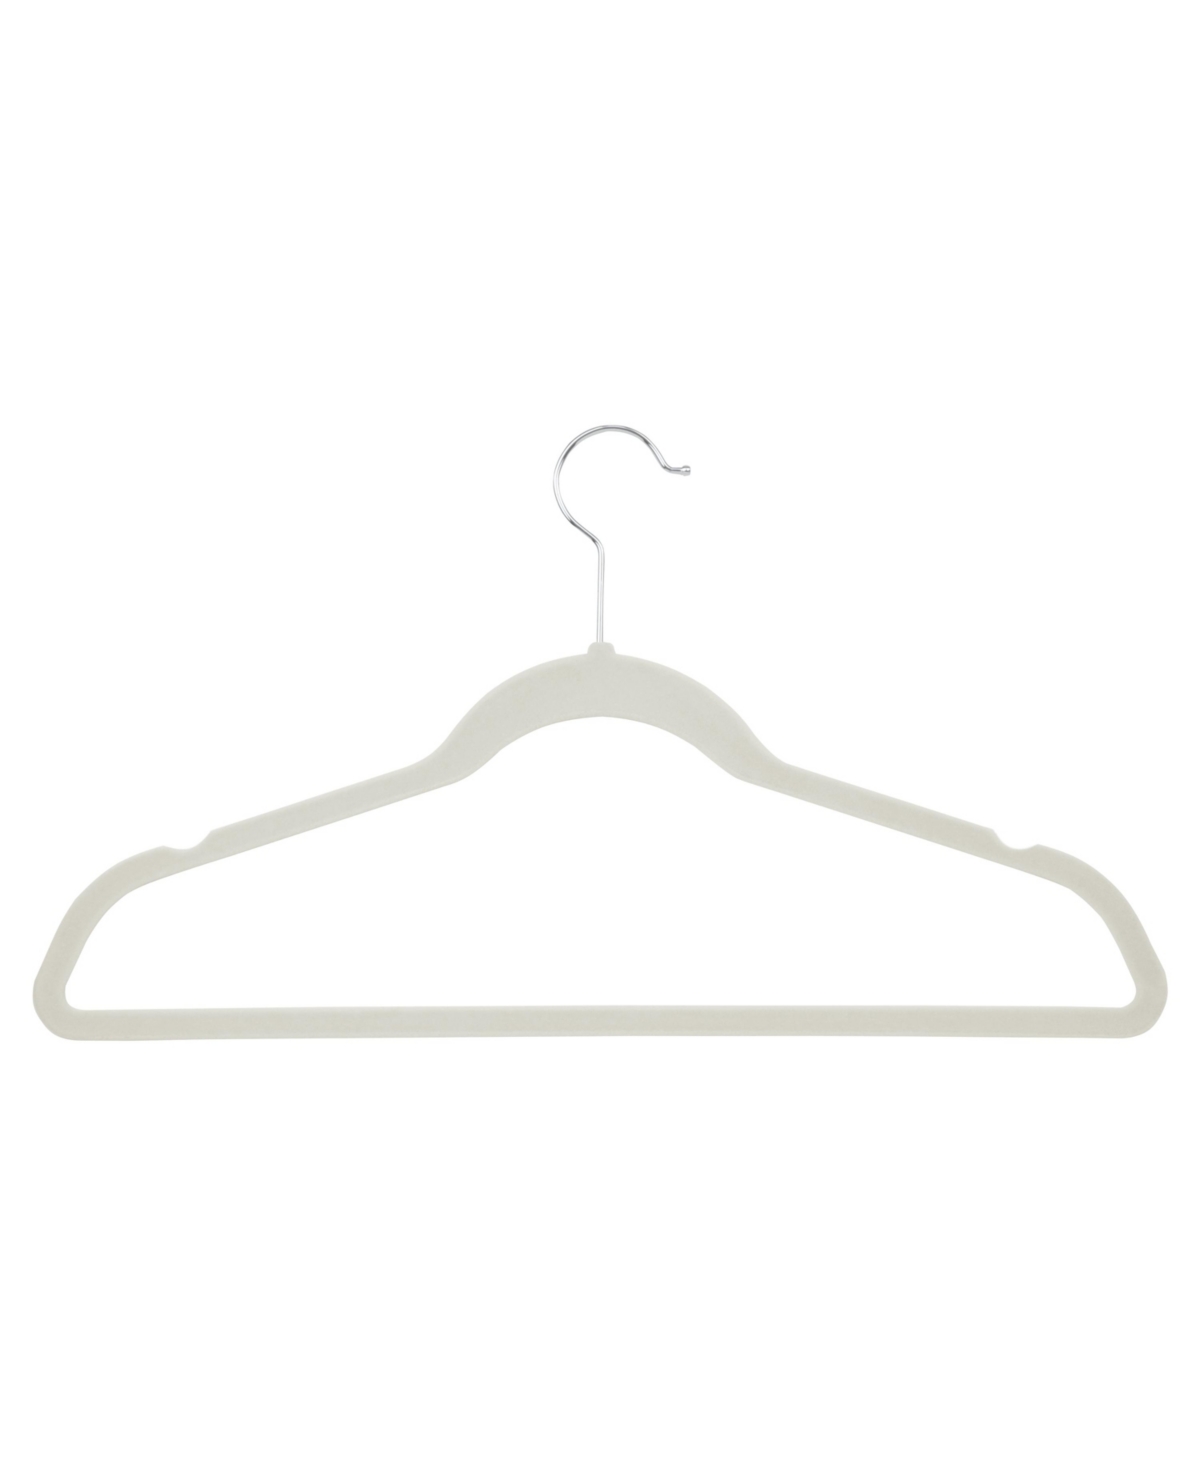 Shop Honey Can Do Collapsible Hangers And Velvet Non-slip Hangers, 55 Piece In White